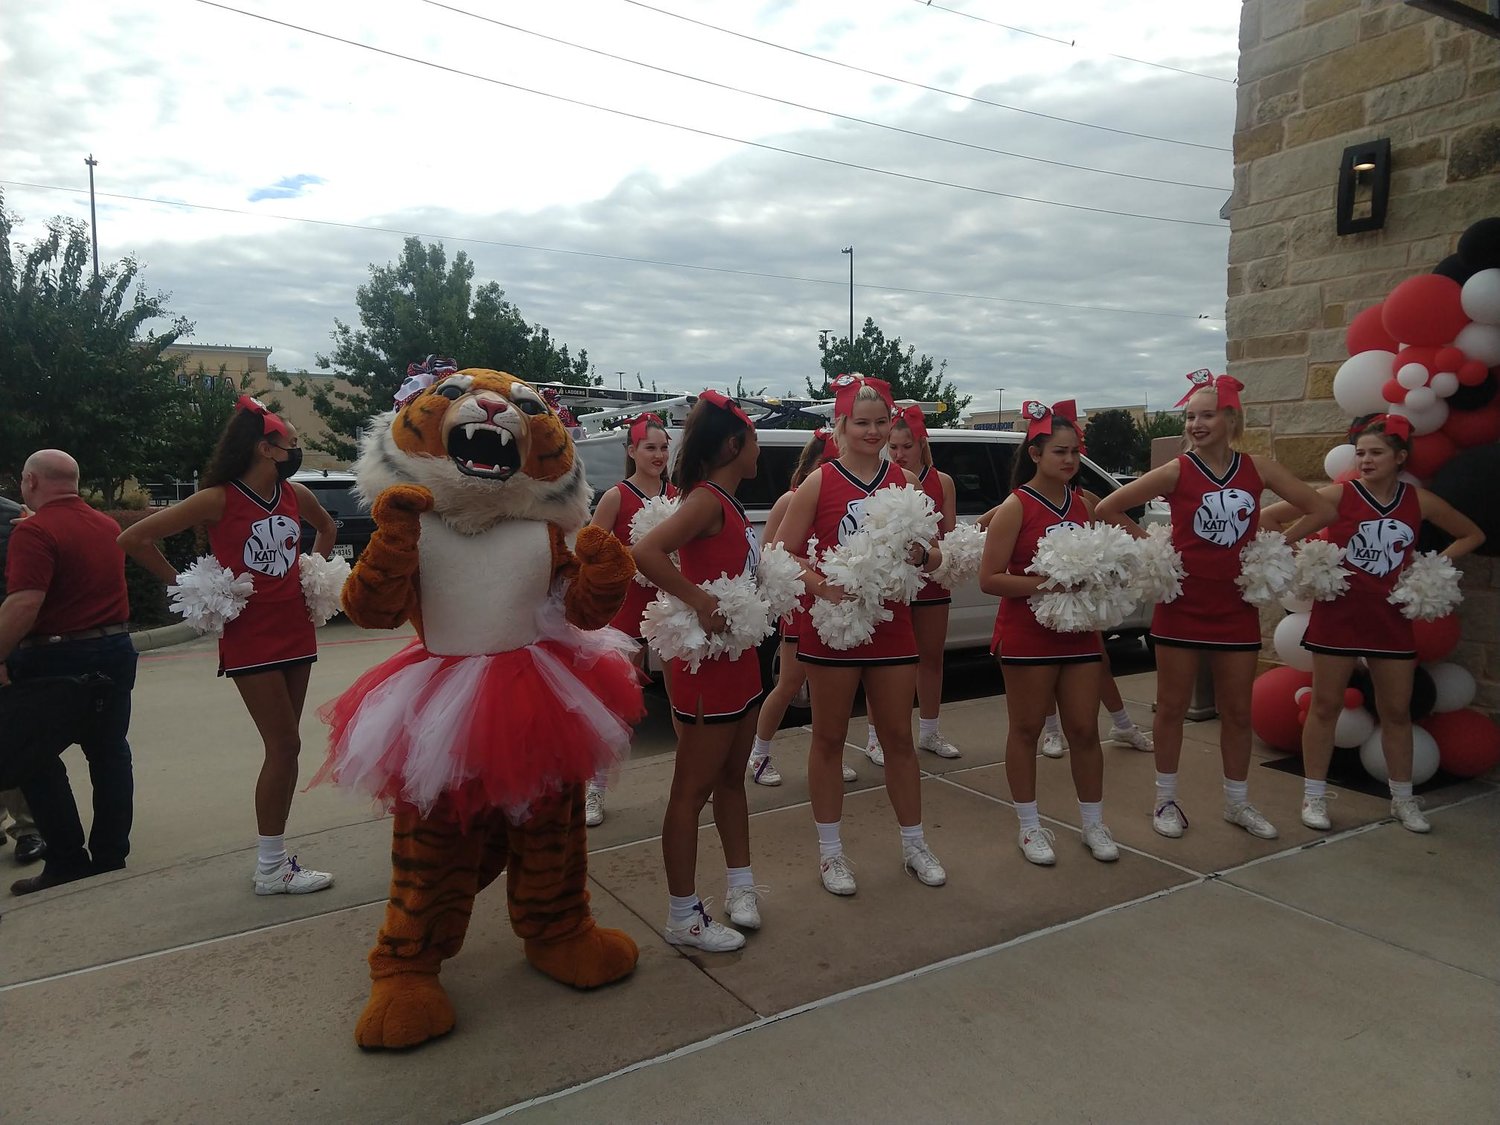 The Katy Tiger cheer squad jazzes up the crowd at the ribbon cutting for Old Chicago Pizza & Taproom on Oct. 11. The ceremony was just one part of SPB Hospitality’s big news for the Katy area after it opted to move its corporate office from Denver, Col. to Texas which will bring hundreds of jobs to the community.